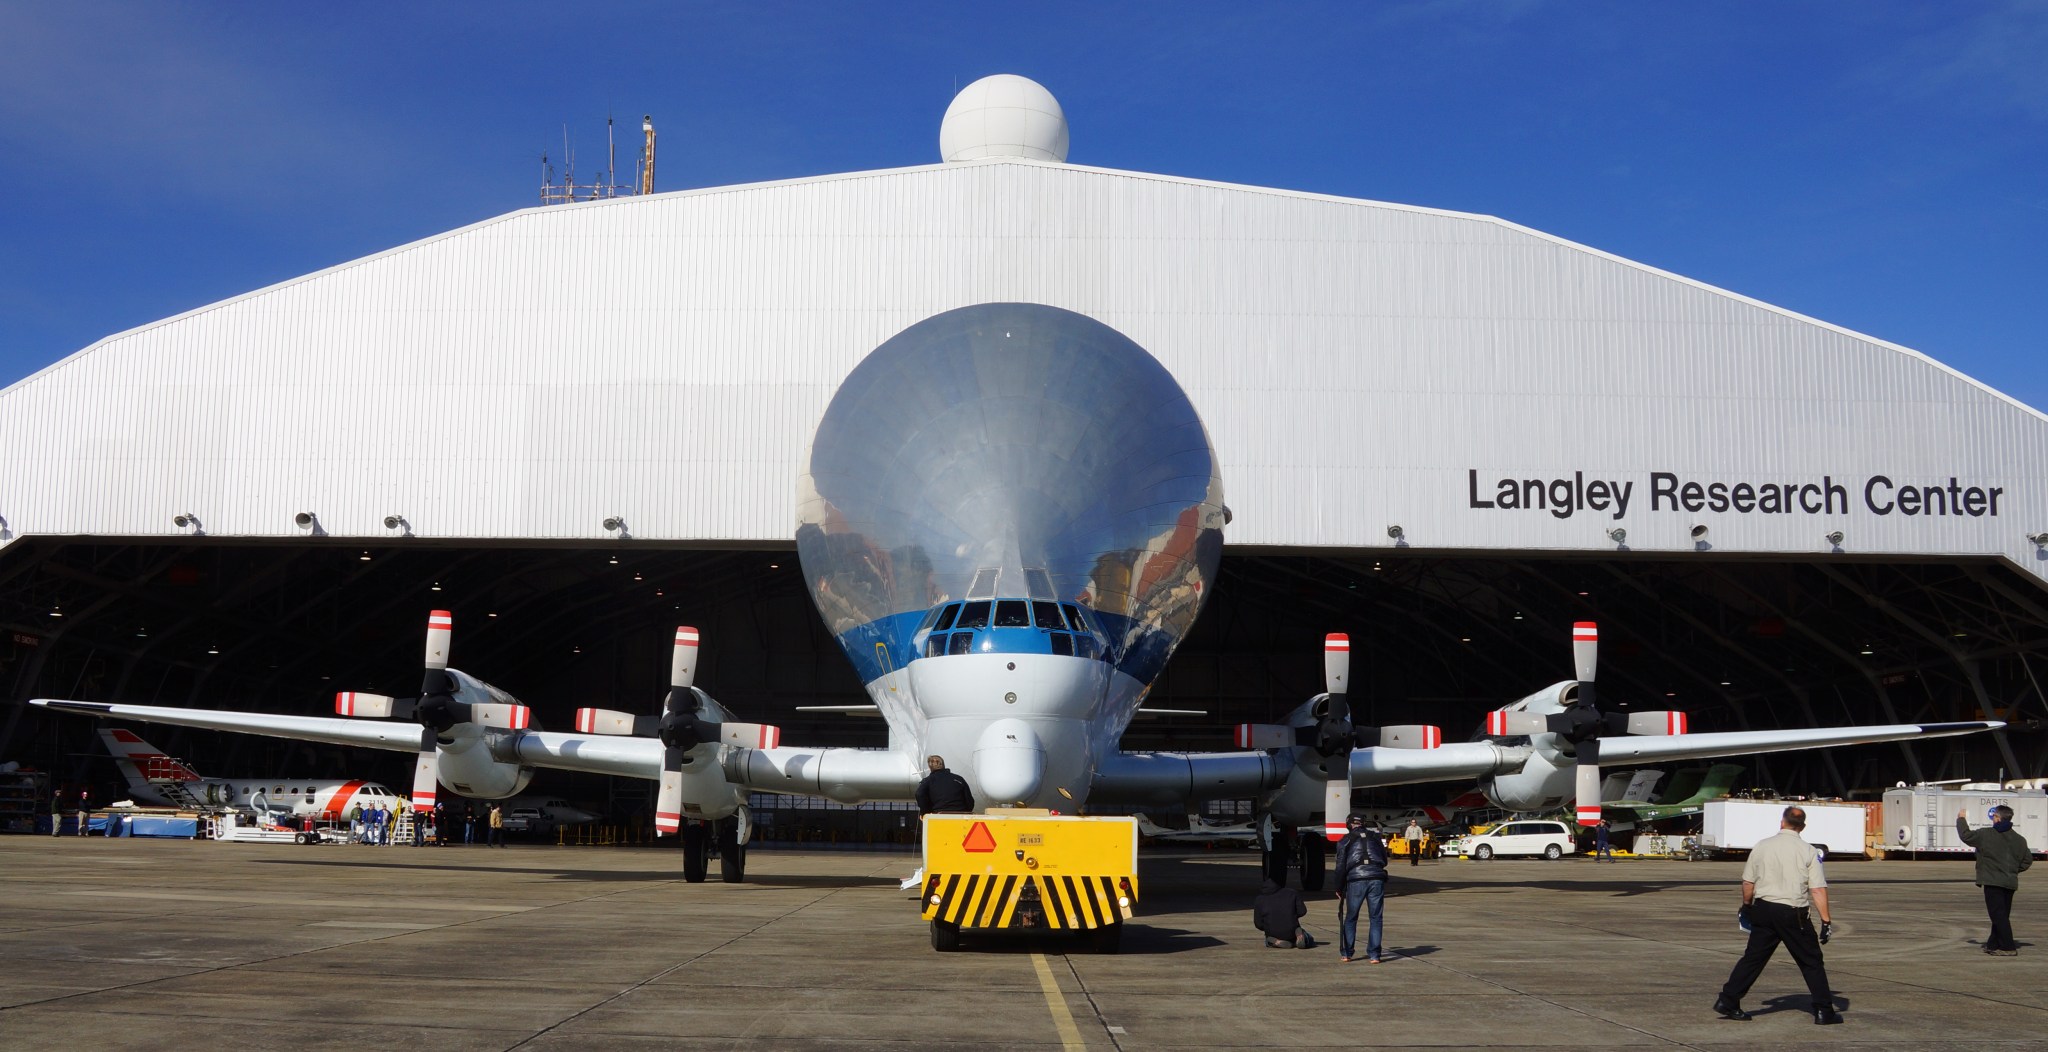 The Super Guppy at NASA Langley Research Center.